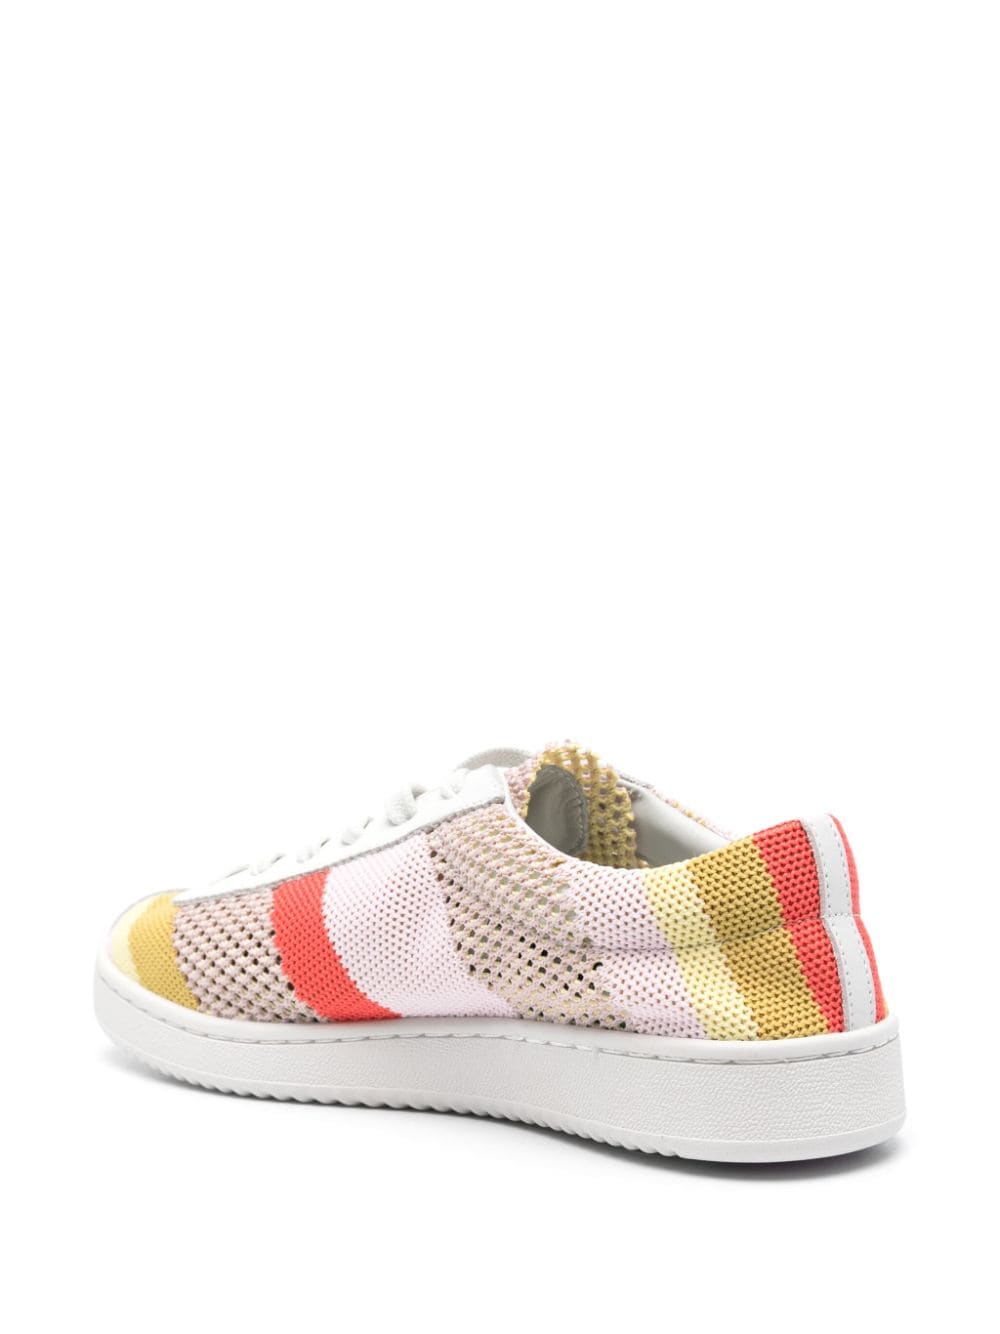 Paul Smith Sneakers Pink